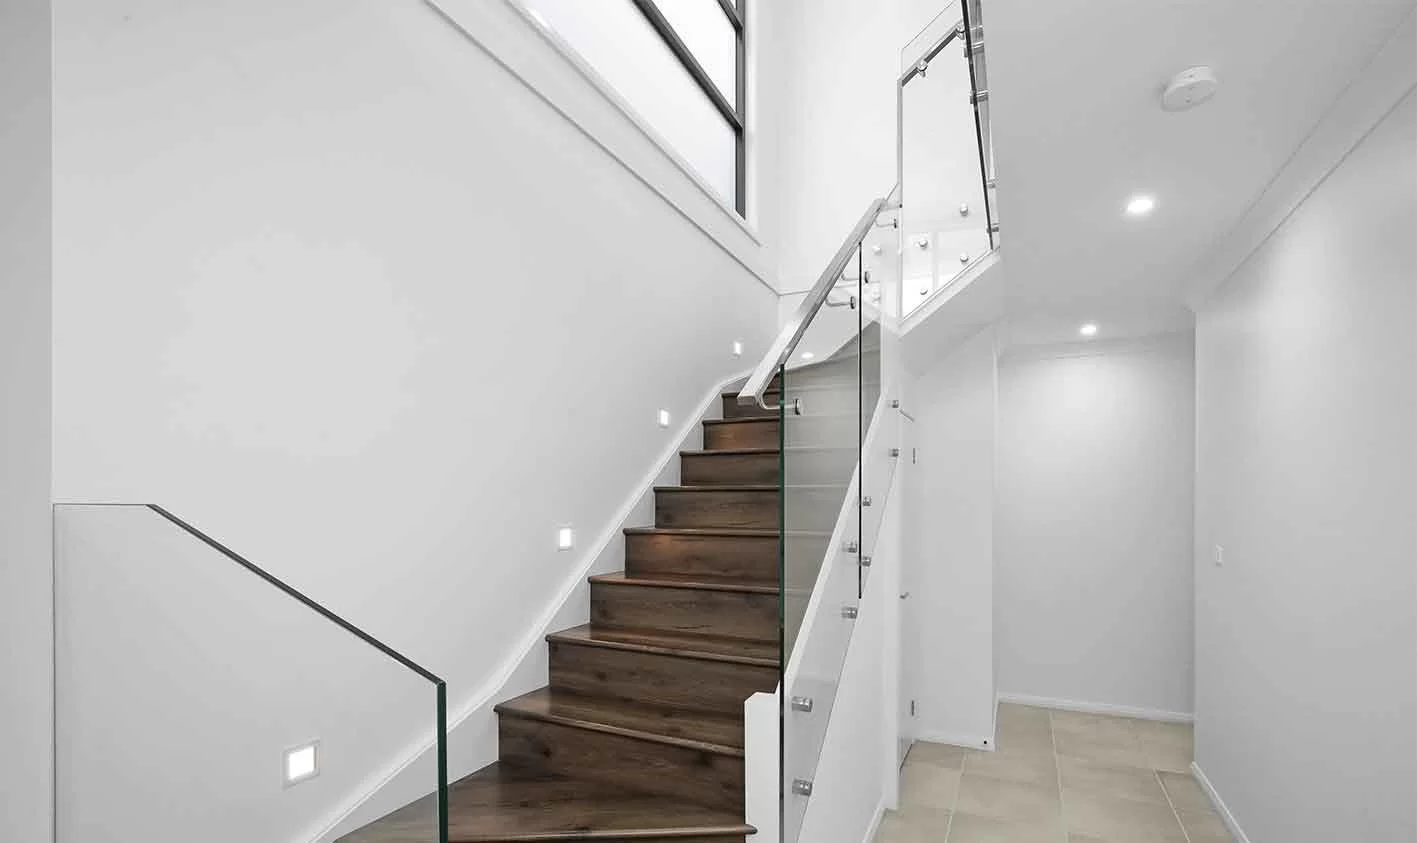 blogs-1417x843 brolenhomes-staircase-03-1417x843